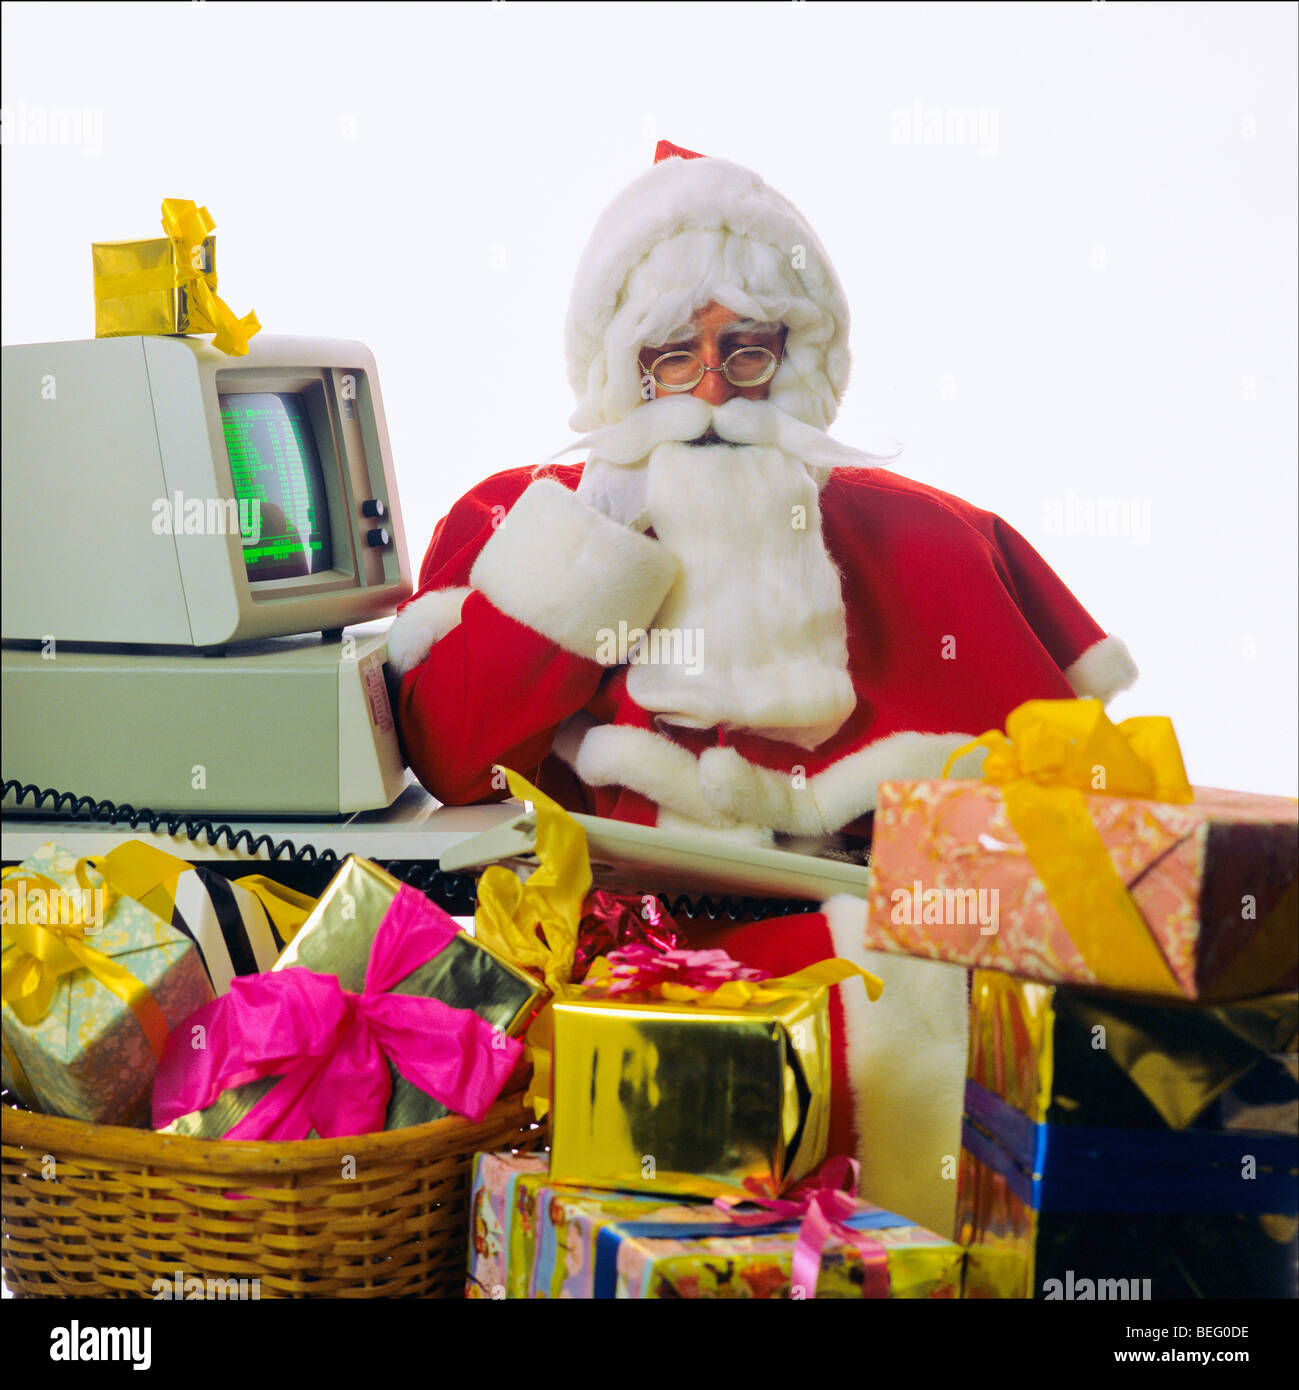 Santa Claus with a 1980s IBM personal computer and Christmas presents Stock Photo